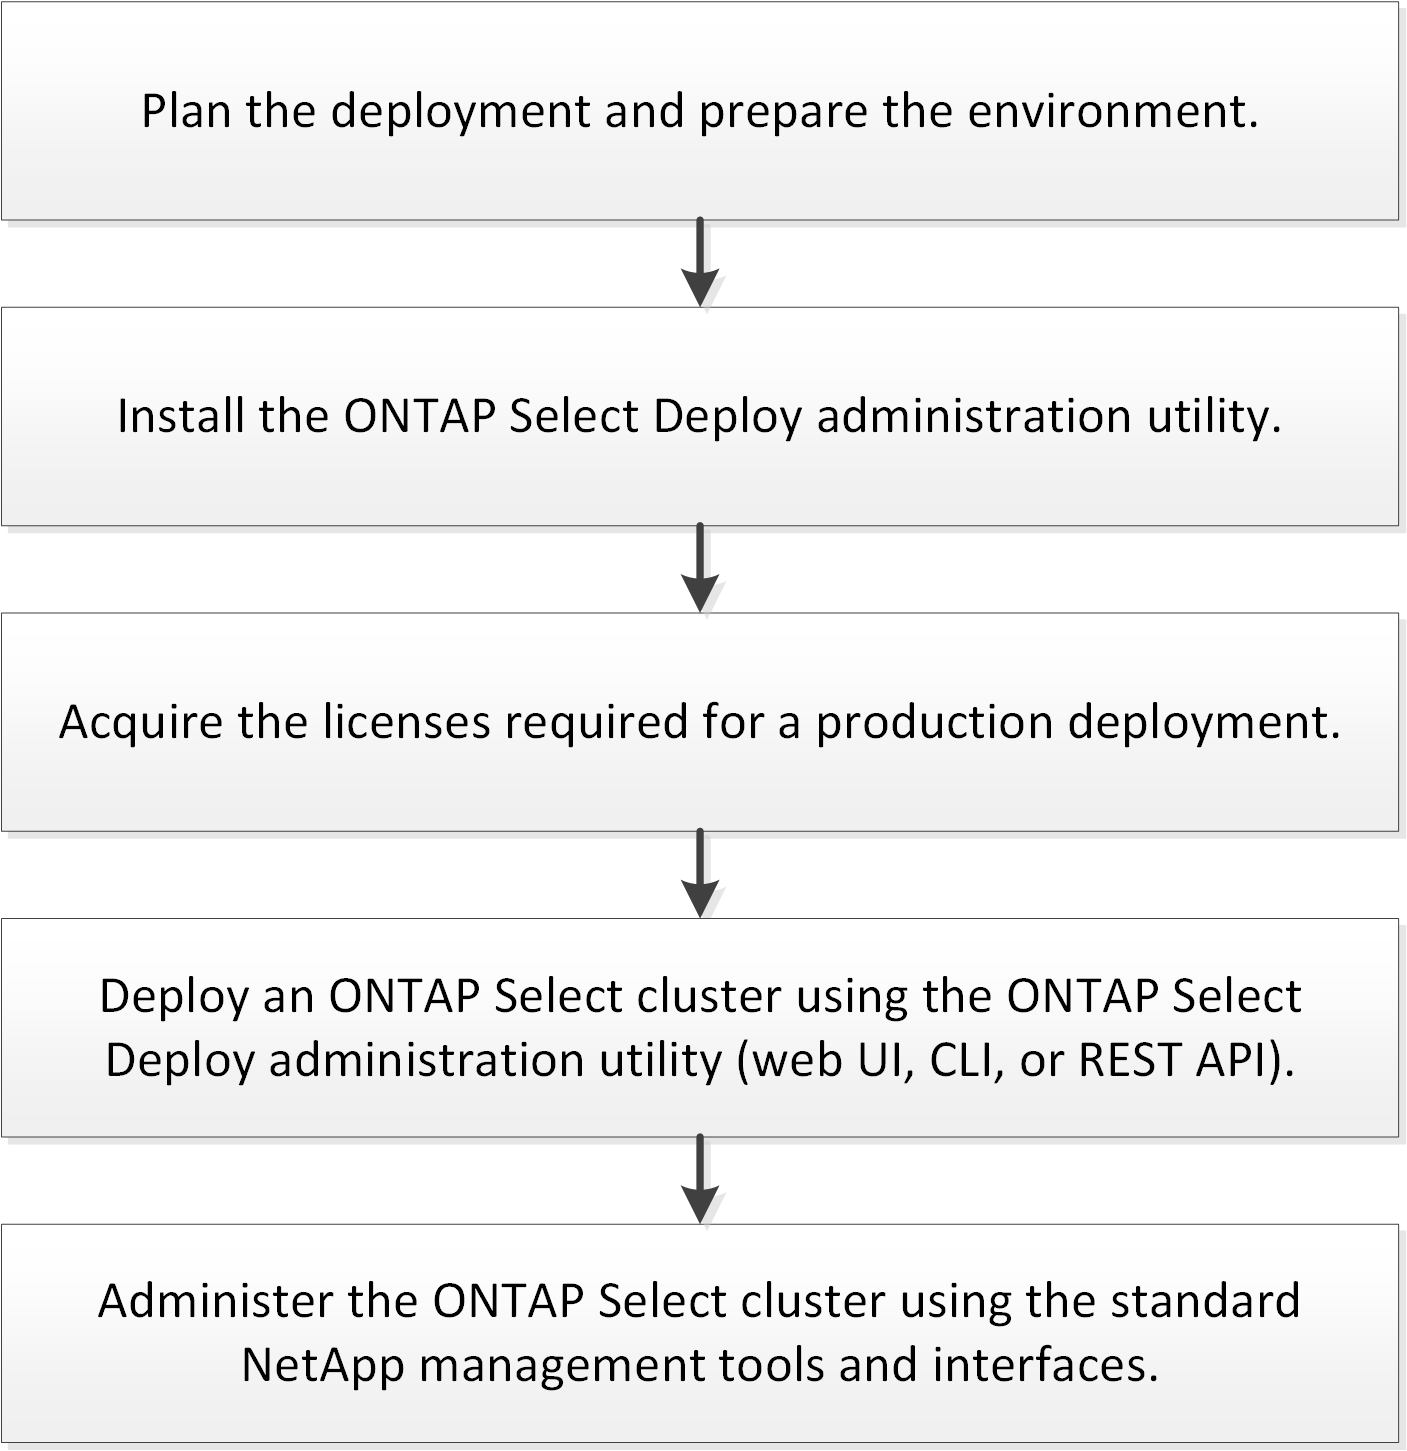 Describes the complete workflow needed to deploy an ONTAP Select cluster.